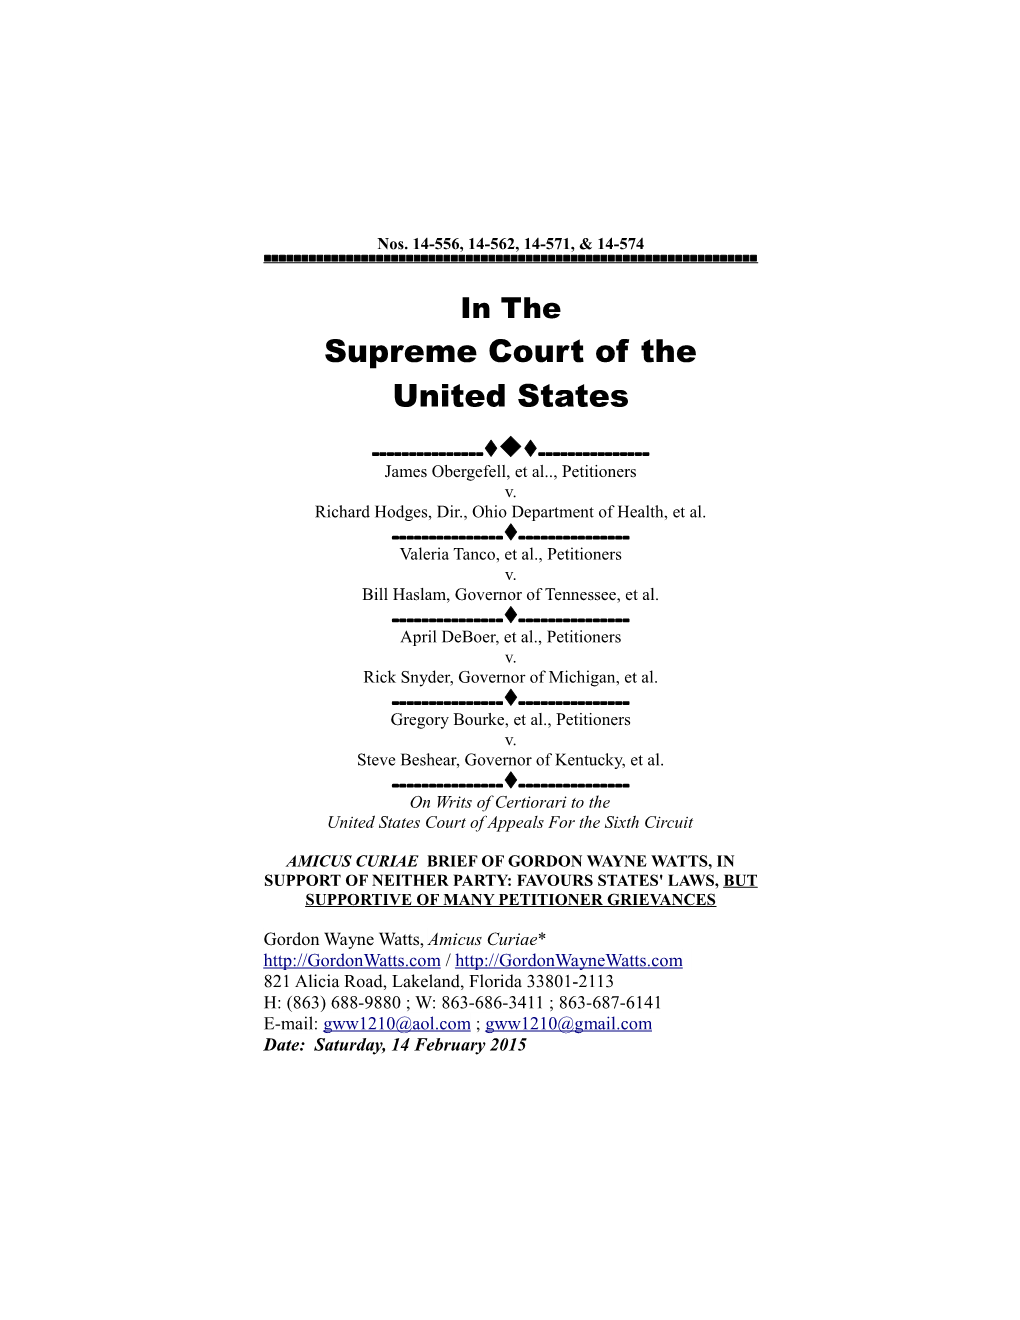 Supreme Court of the United States s1